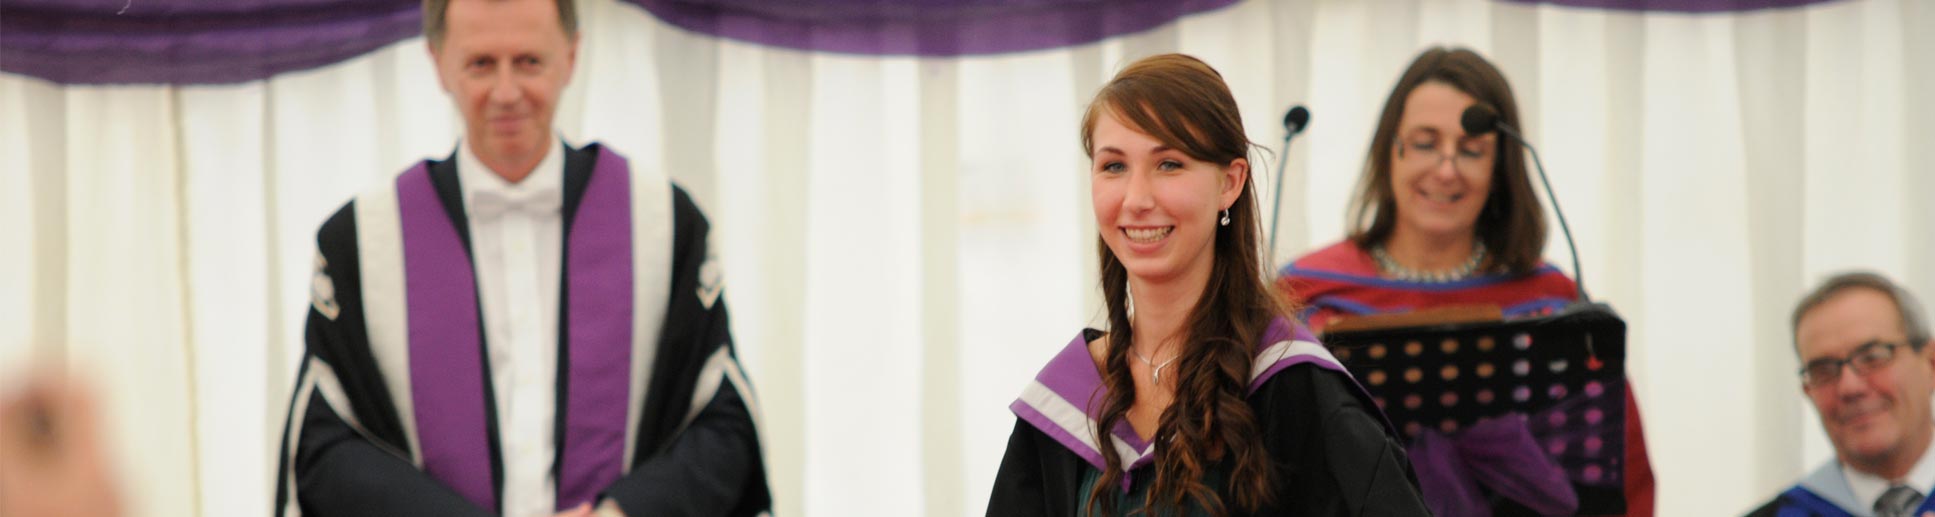 Image showing happy young student receiving her graduation certificate